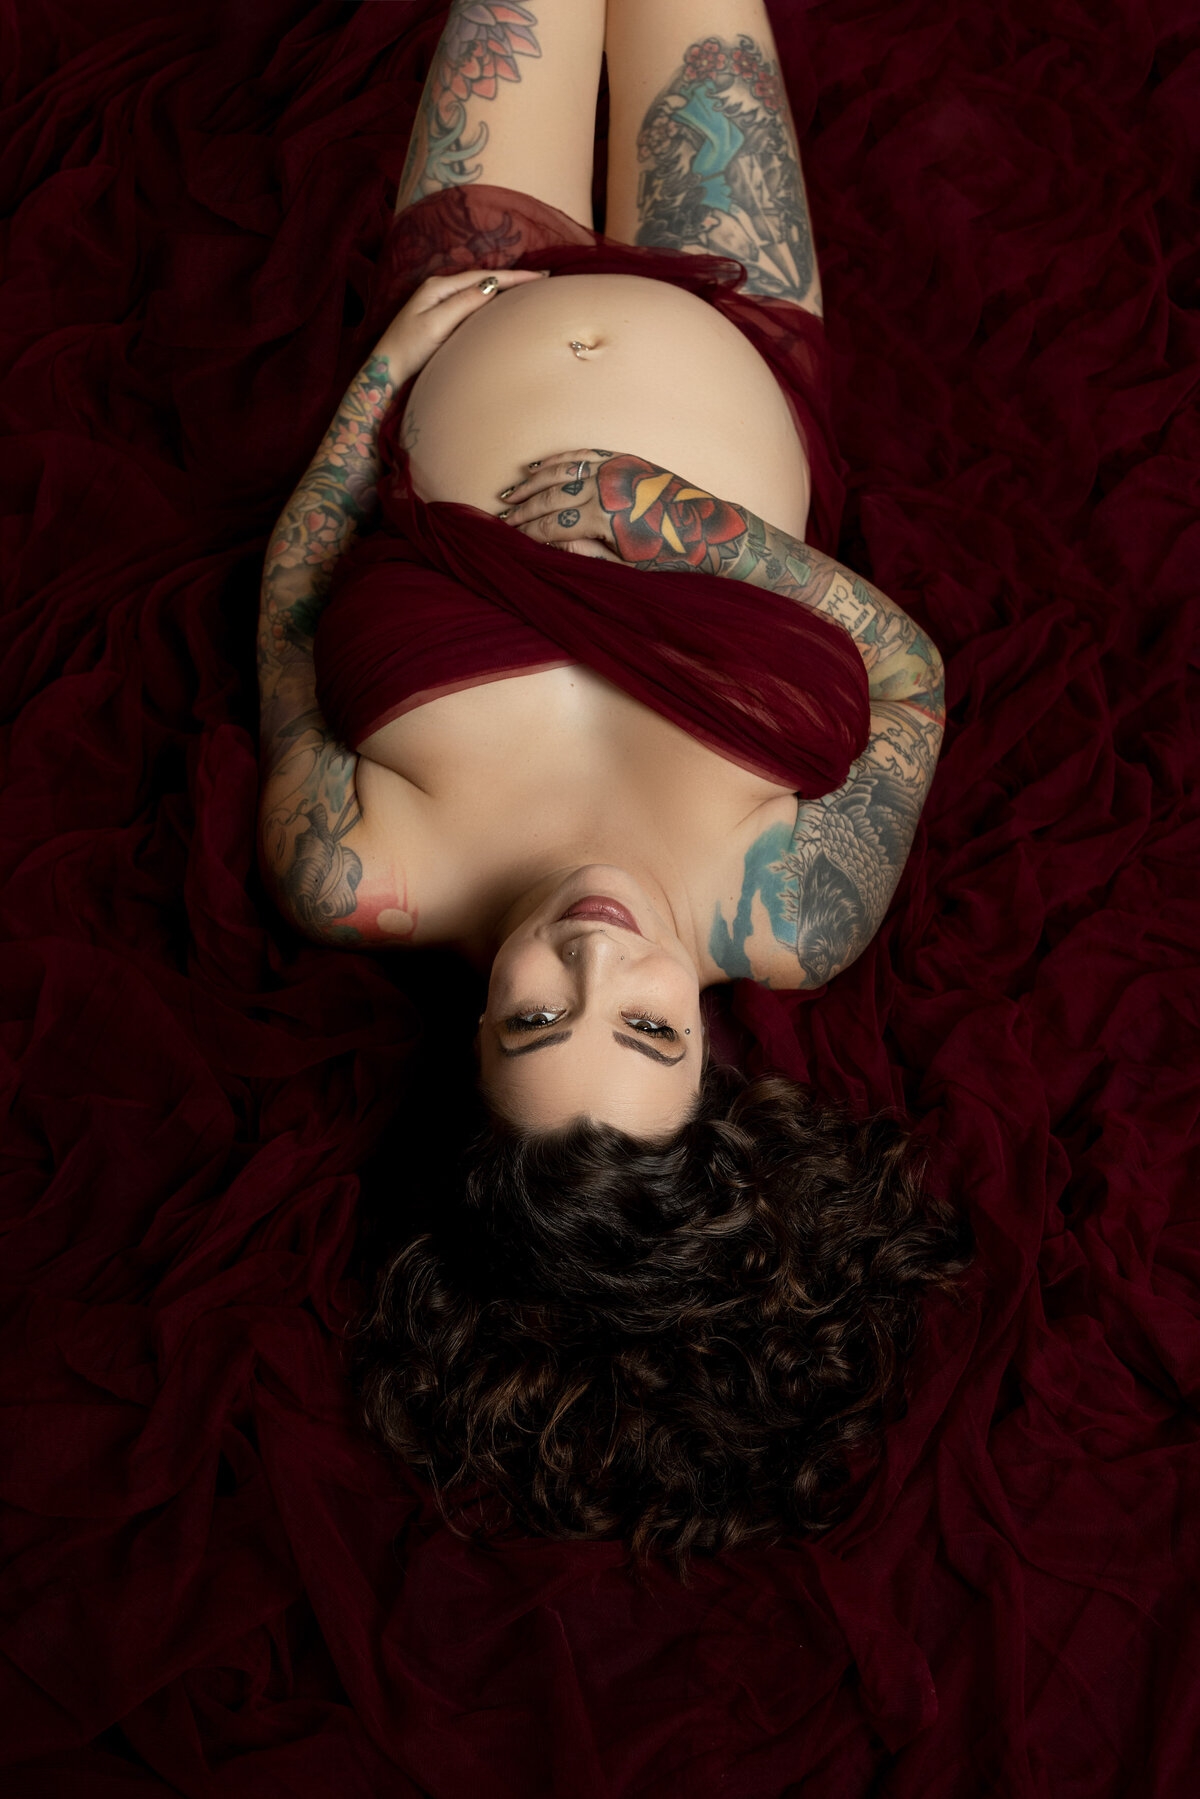 Expectant, tattooed mom in London, Ontario maternity studio photo session. Mom laying on burgundy velvet with only breasts covered. Colourful tattoos are prominent.